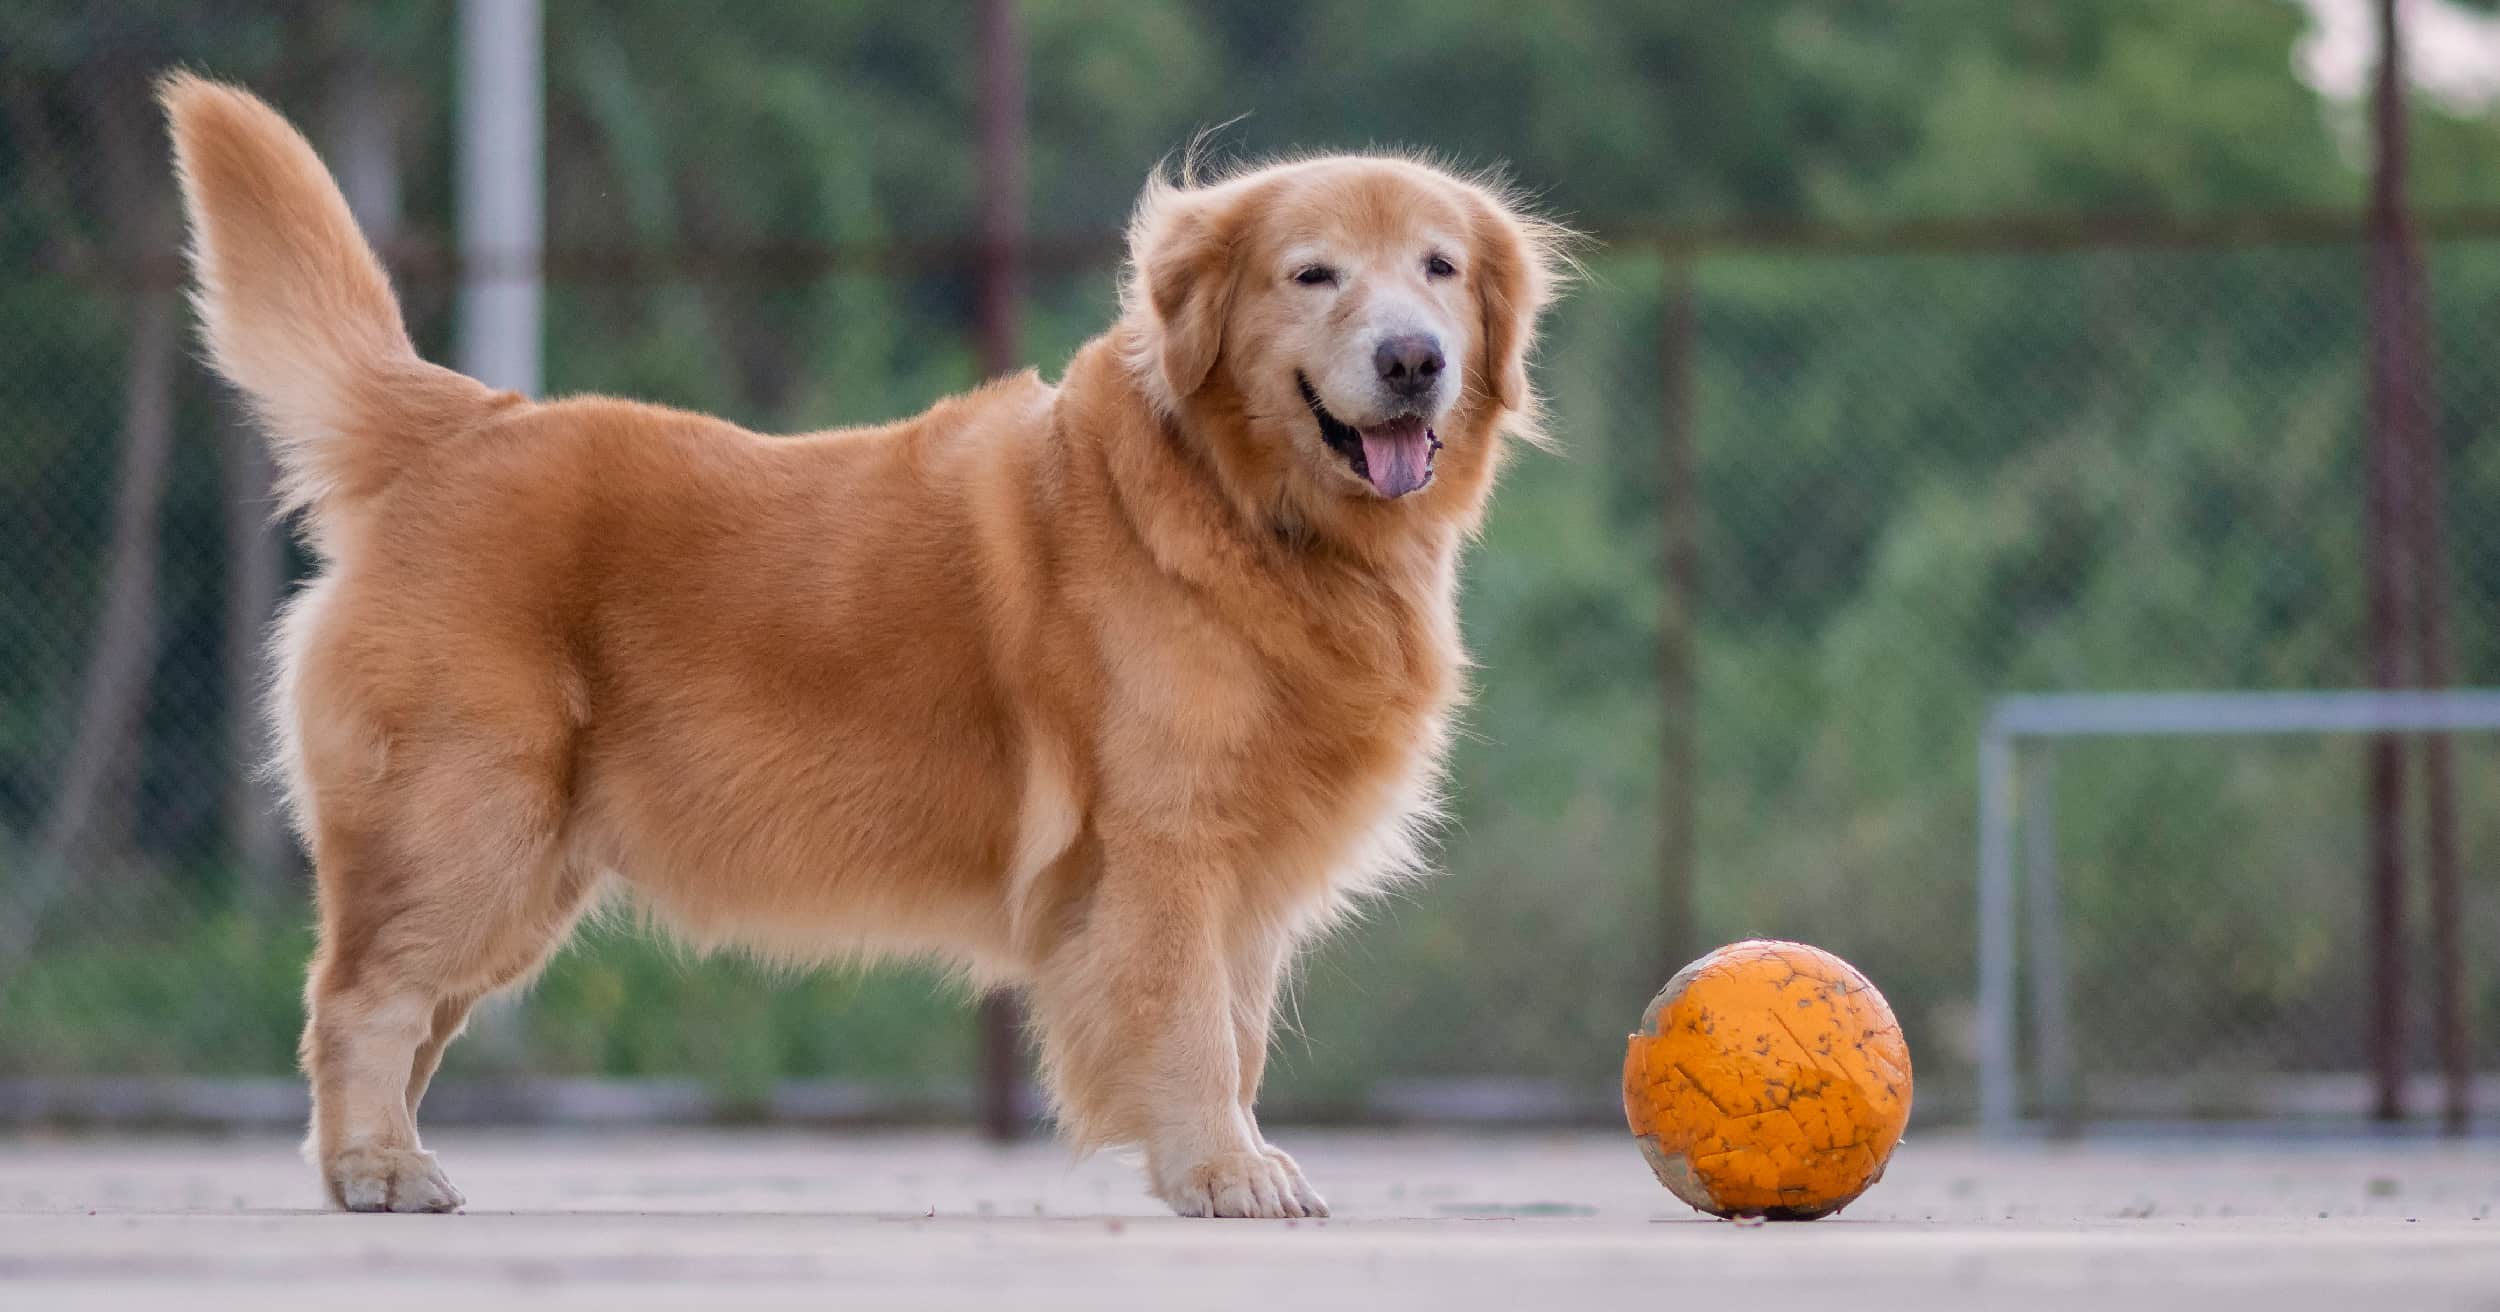 An overweight older dog standing in front of a soccer ball outside.